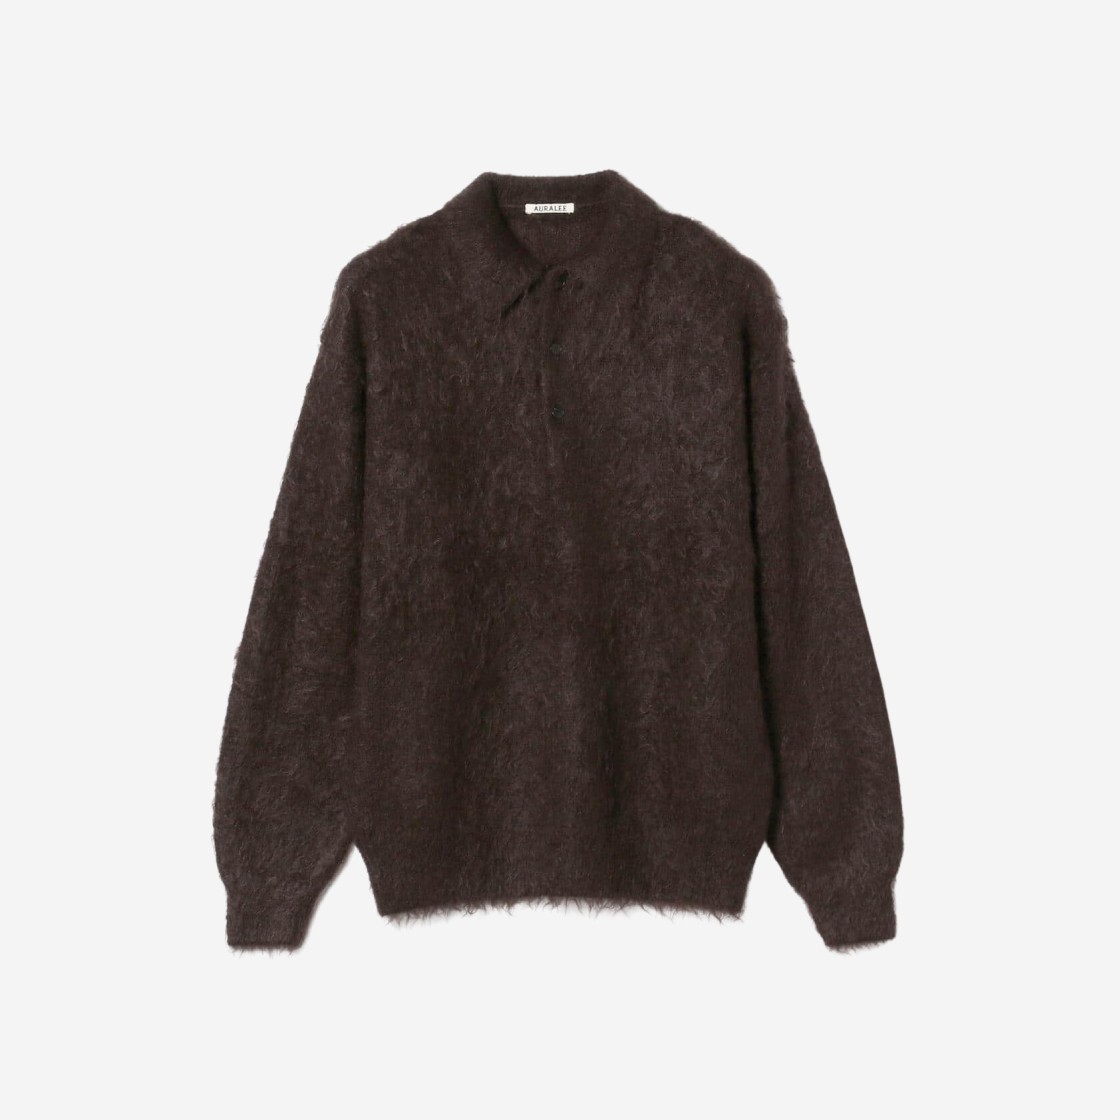 54%OFF!】 BRUSHED SUPER KID MOHAIR KNIT ecousarecycling.com